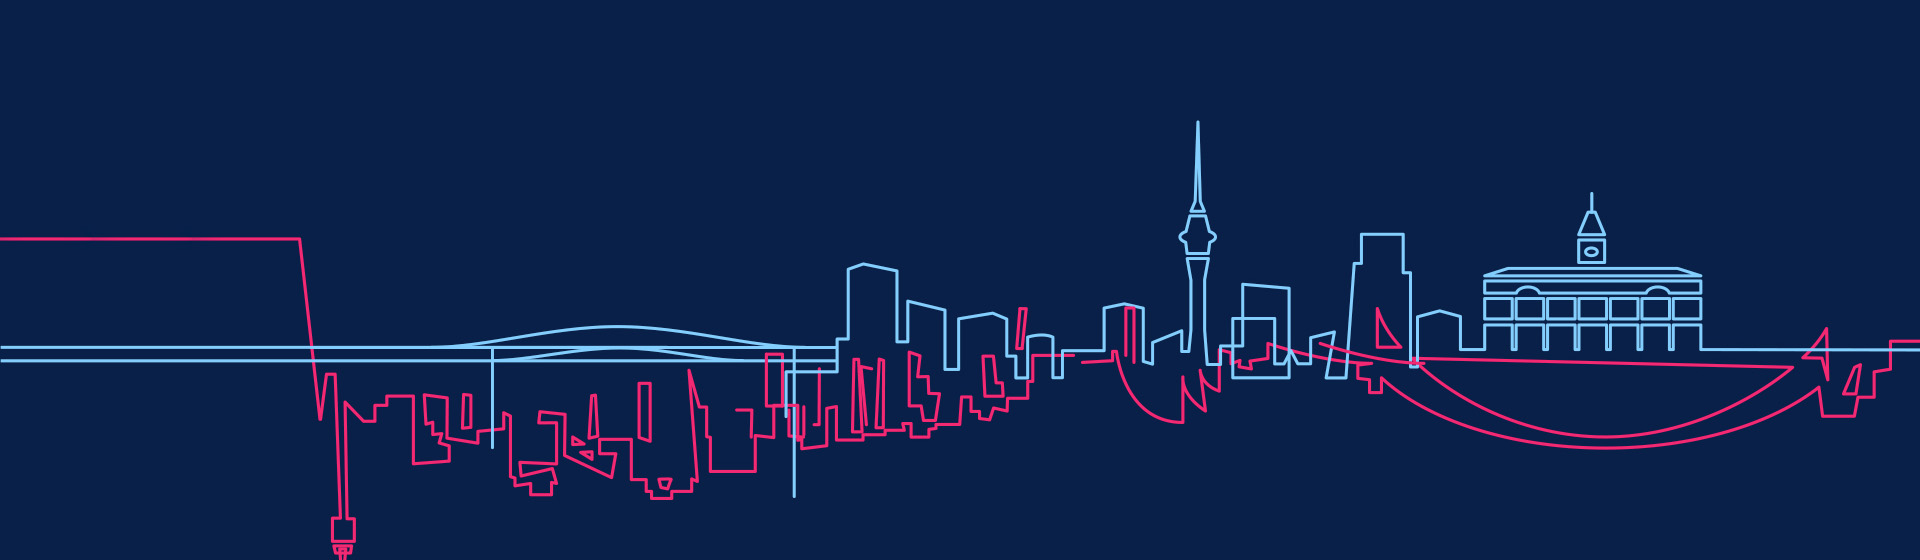 Illustration of the Auckland and Sydney skylines